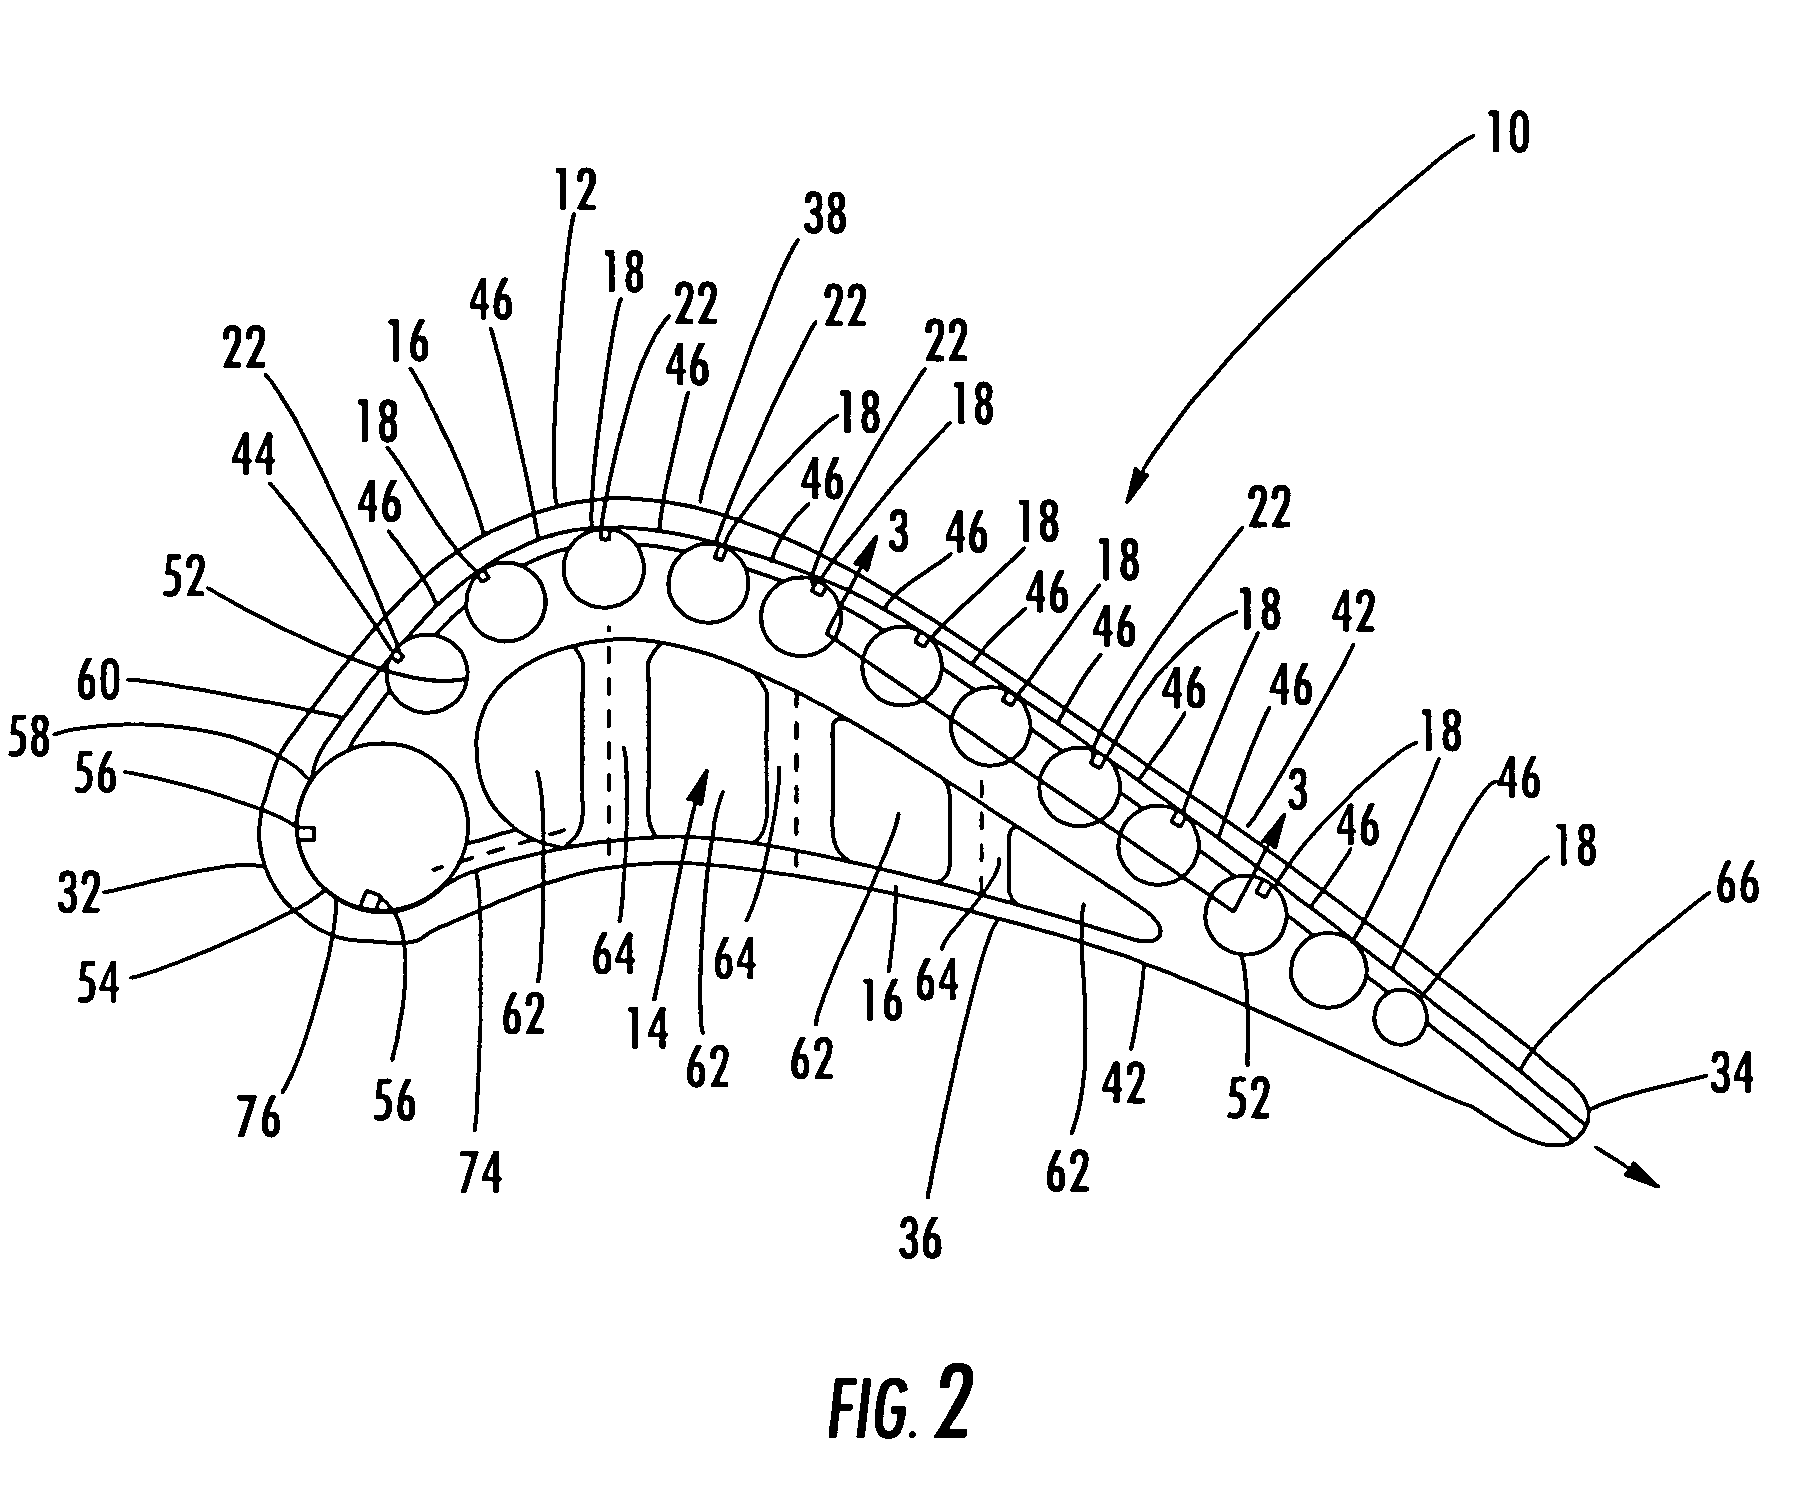 Turbine airfoil cooling system with near wall vortex cooling chambers